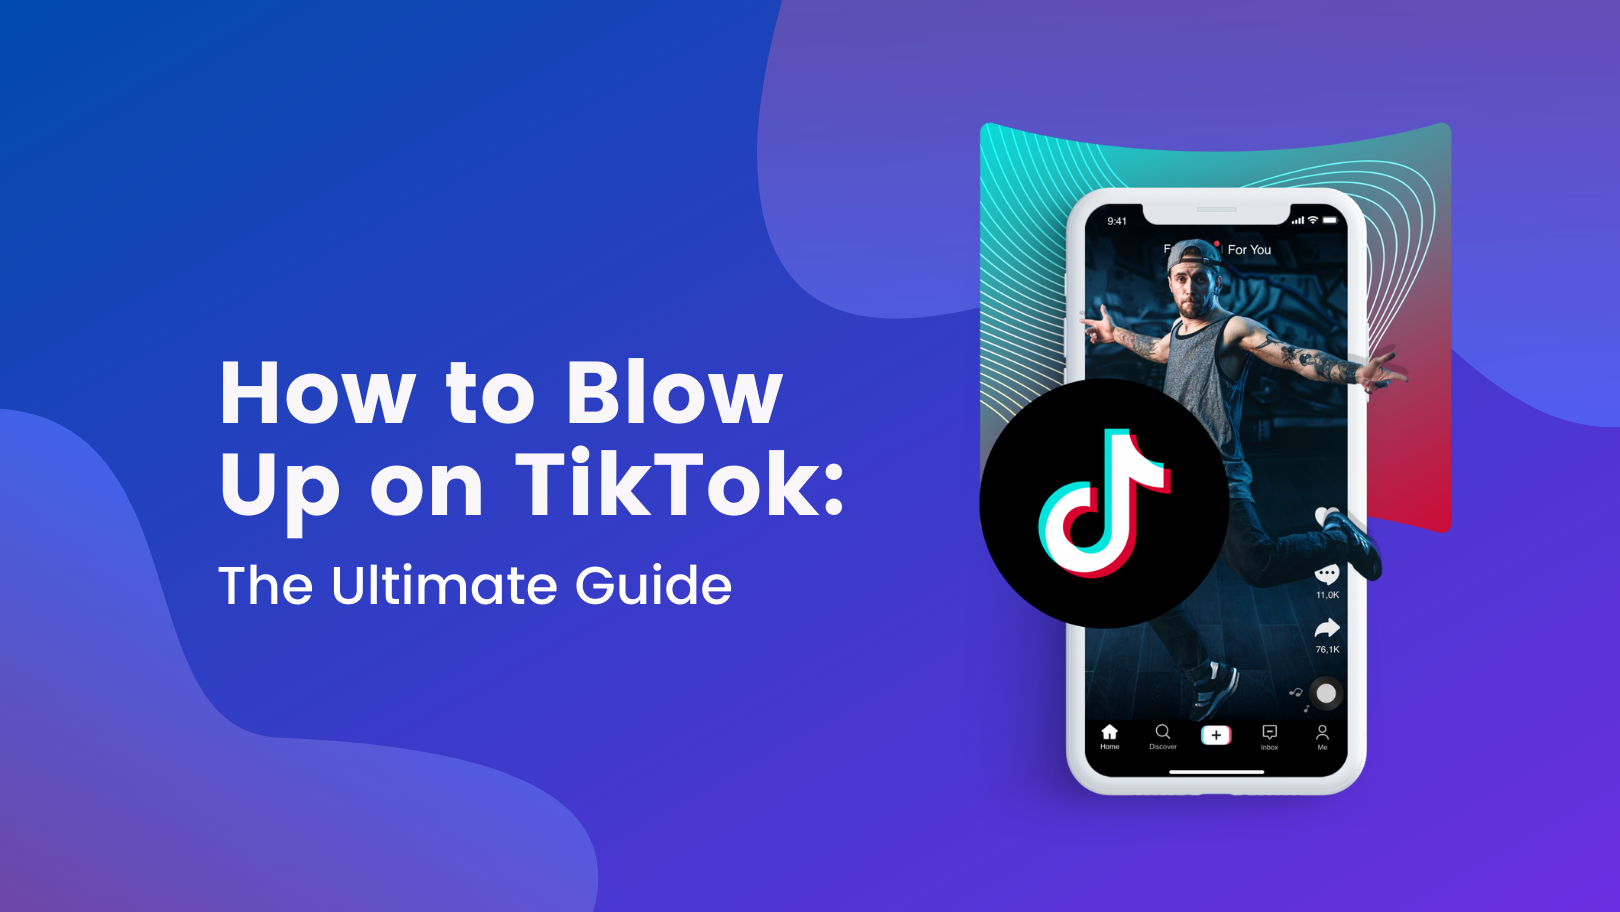 How to blow up on TikTok